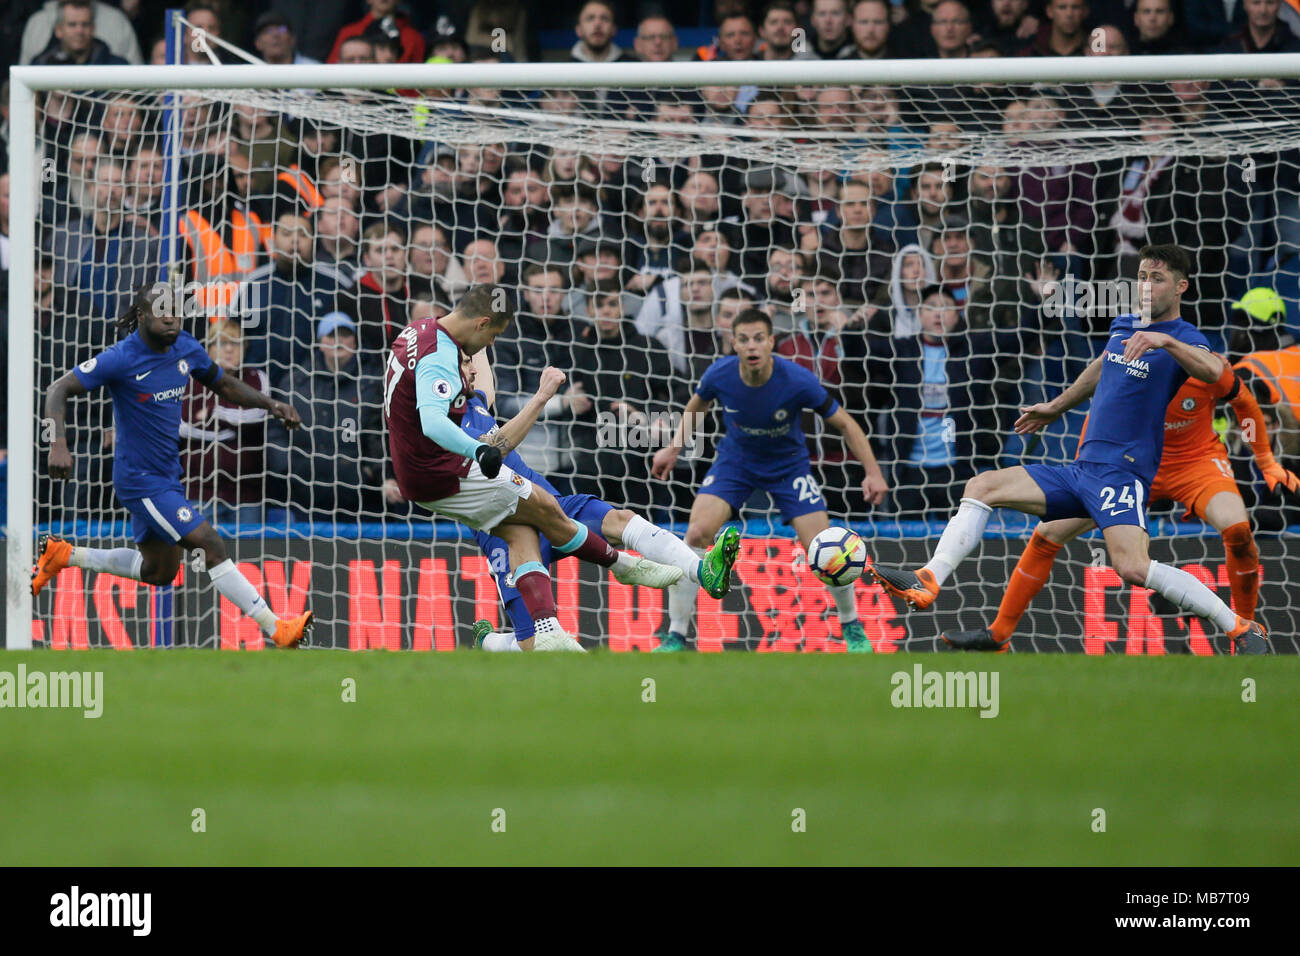 London, UK. 8th Apr, 2018. West Ham's Javier Hernandez (2nd L) scores a goal during the Premier League football match between Chelsea and West Ham United at Stamford Bridge Stadium in London, Britain on April 8, 2018. The match ended with a draw 1-1. Credit: Tim Ireland/Xinhua/Alamy Live News Stock Photo